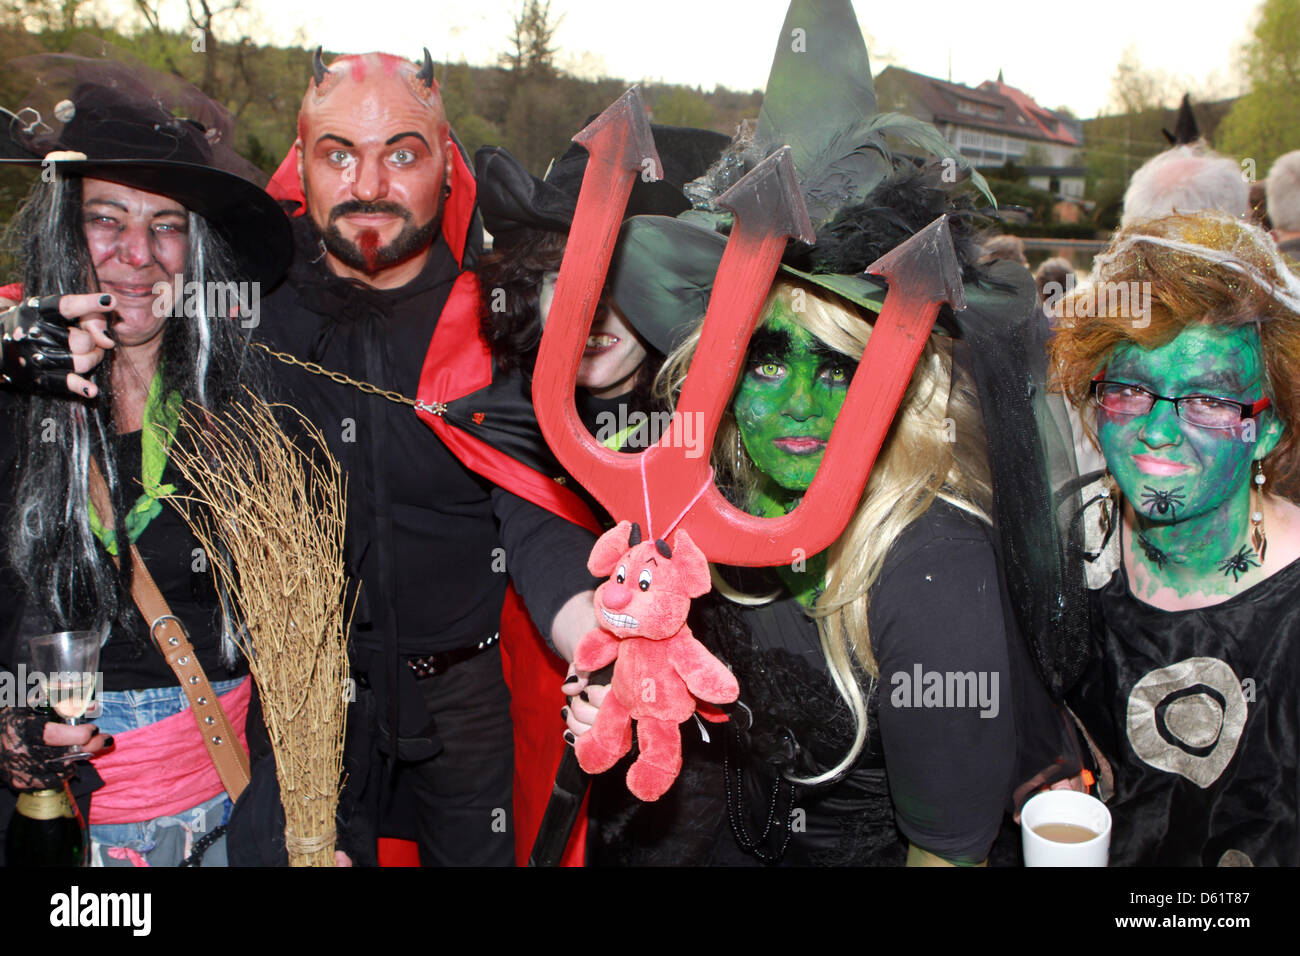 People in costume celebrate the 'Walpurgisnacht' witches night in Braunlage, Germany, 30 April 2012. According to German legend, this festival has been associated with a witches' carnival, and on this night it was believed that witches met with the devil for one final night of revelry before being consigned to the underworld.  Photo: MATTHIAS BEIN Stock Photo